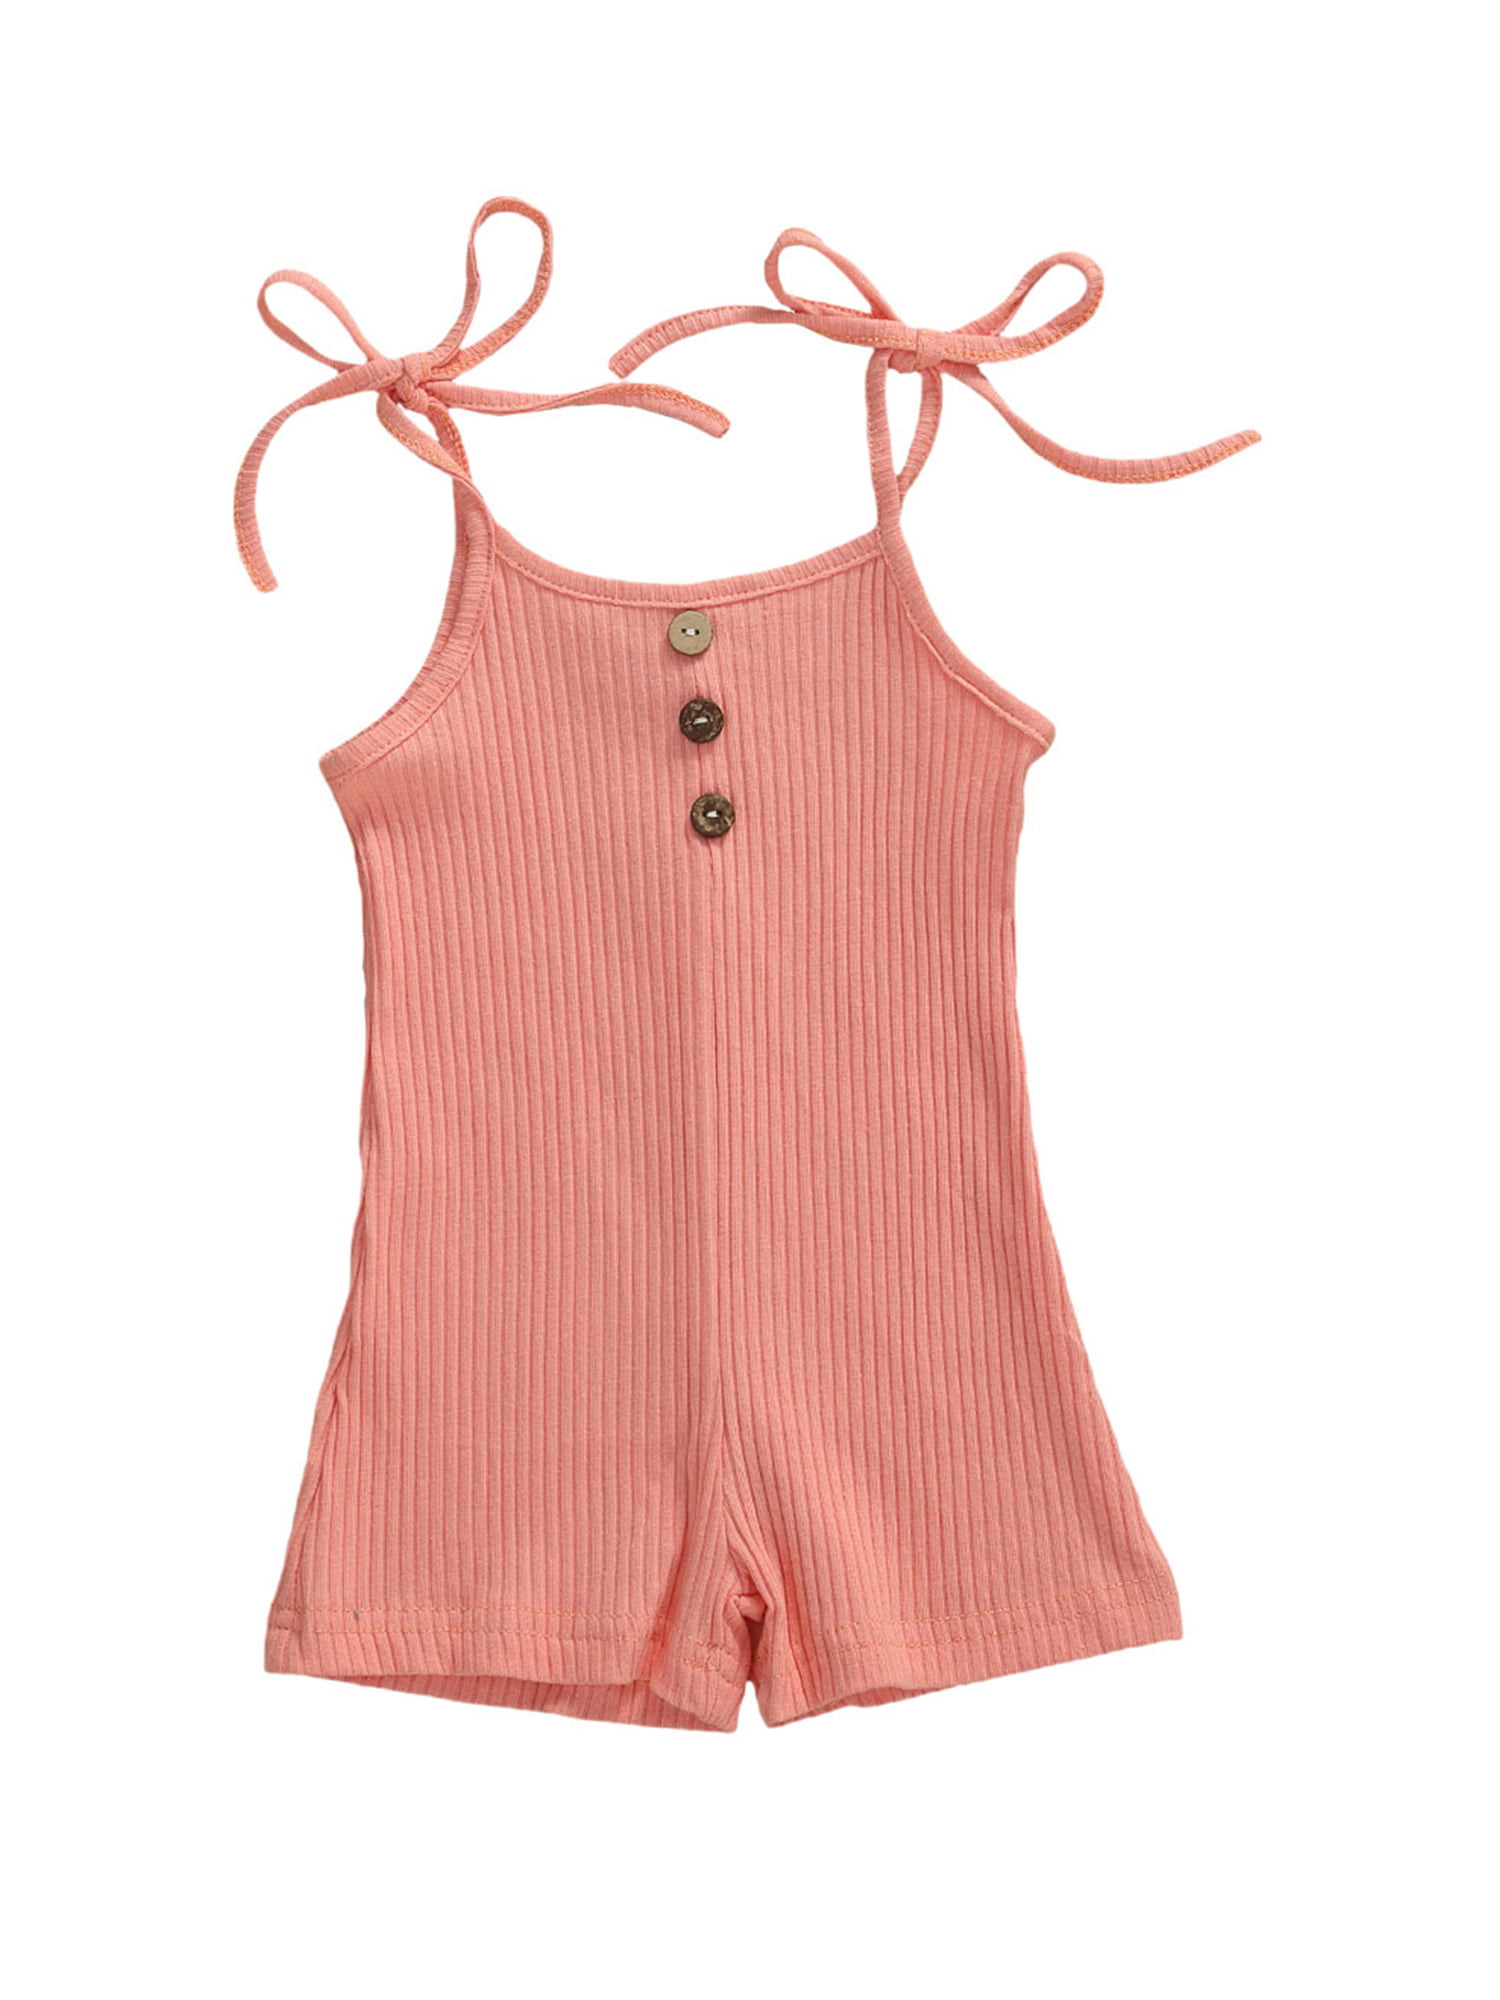 Infant Baby Girl Clothes Solid Color Sleeveless Adjustable Strap Ribbed Romper Bodysuit One-Piece Jumpsuit Outfit Set